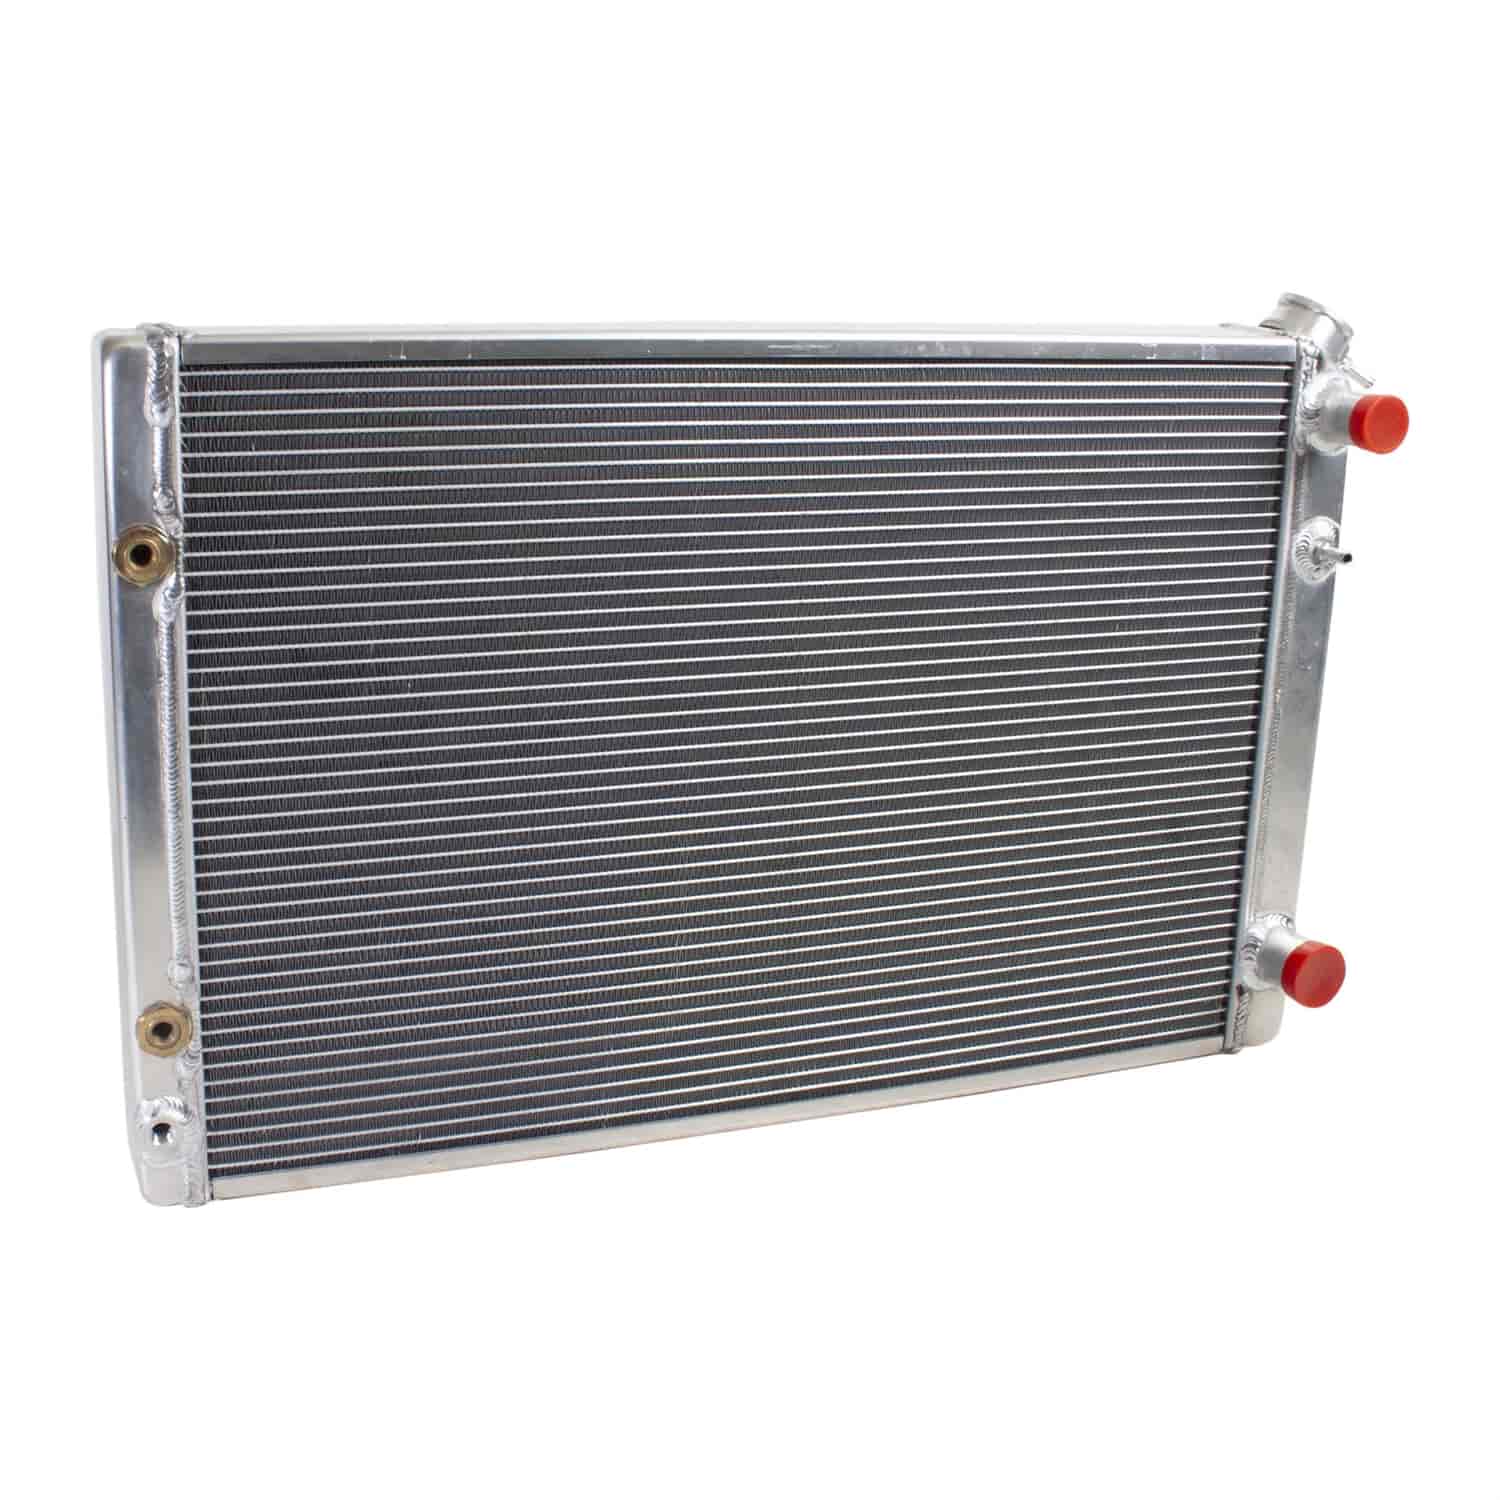 PerformanceFit Radiator 1979-1993 Ford Mustang with Transmission